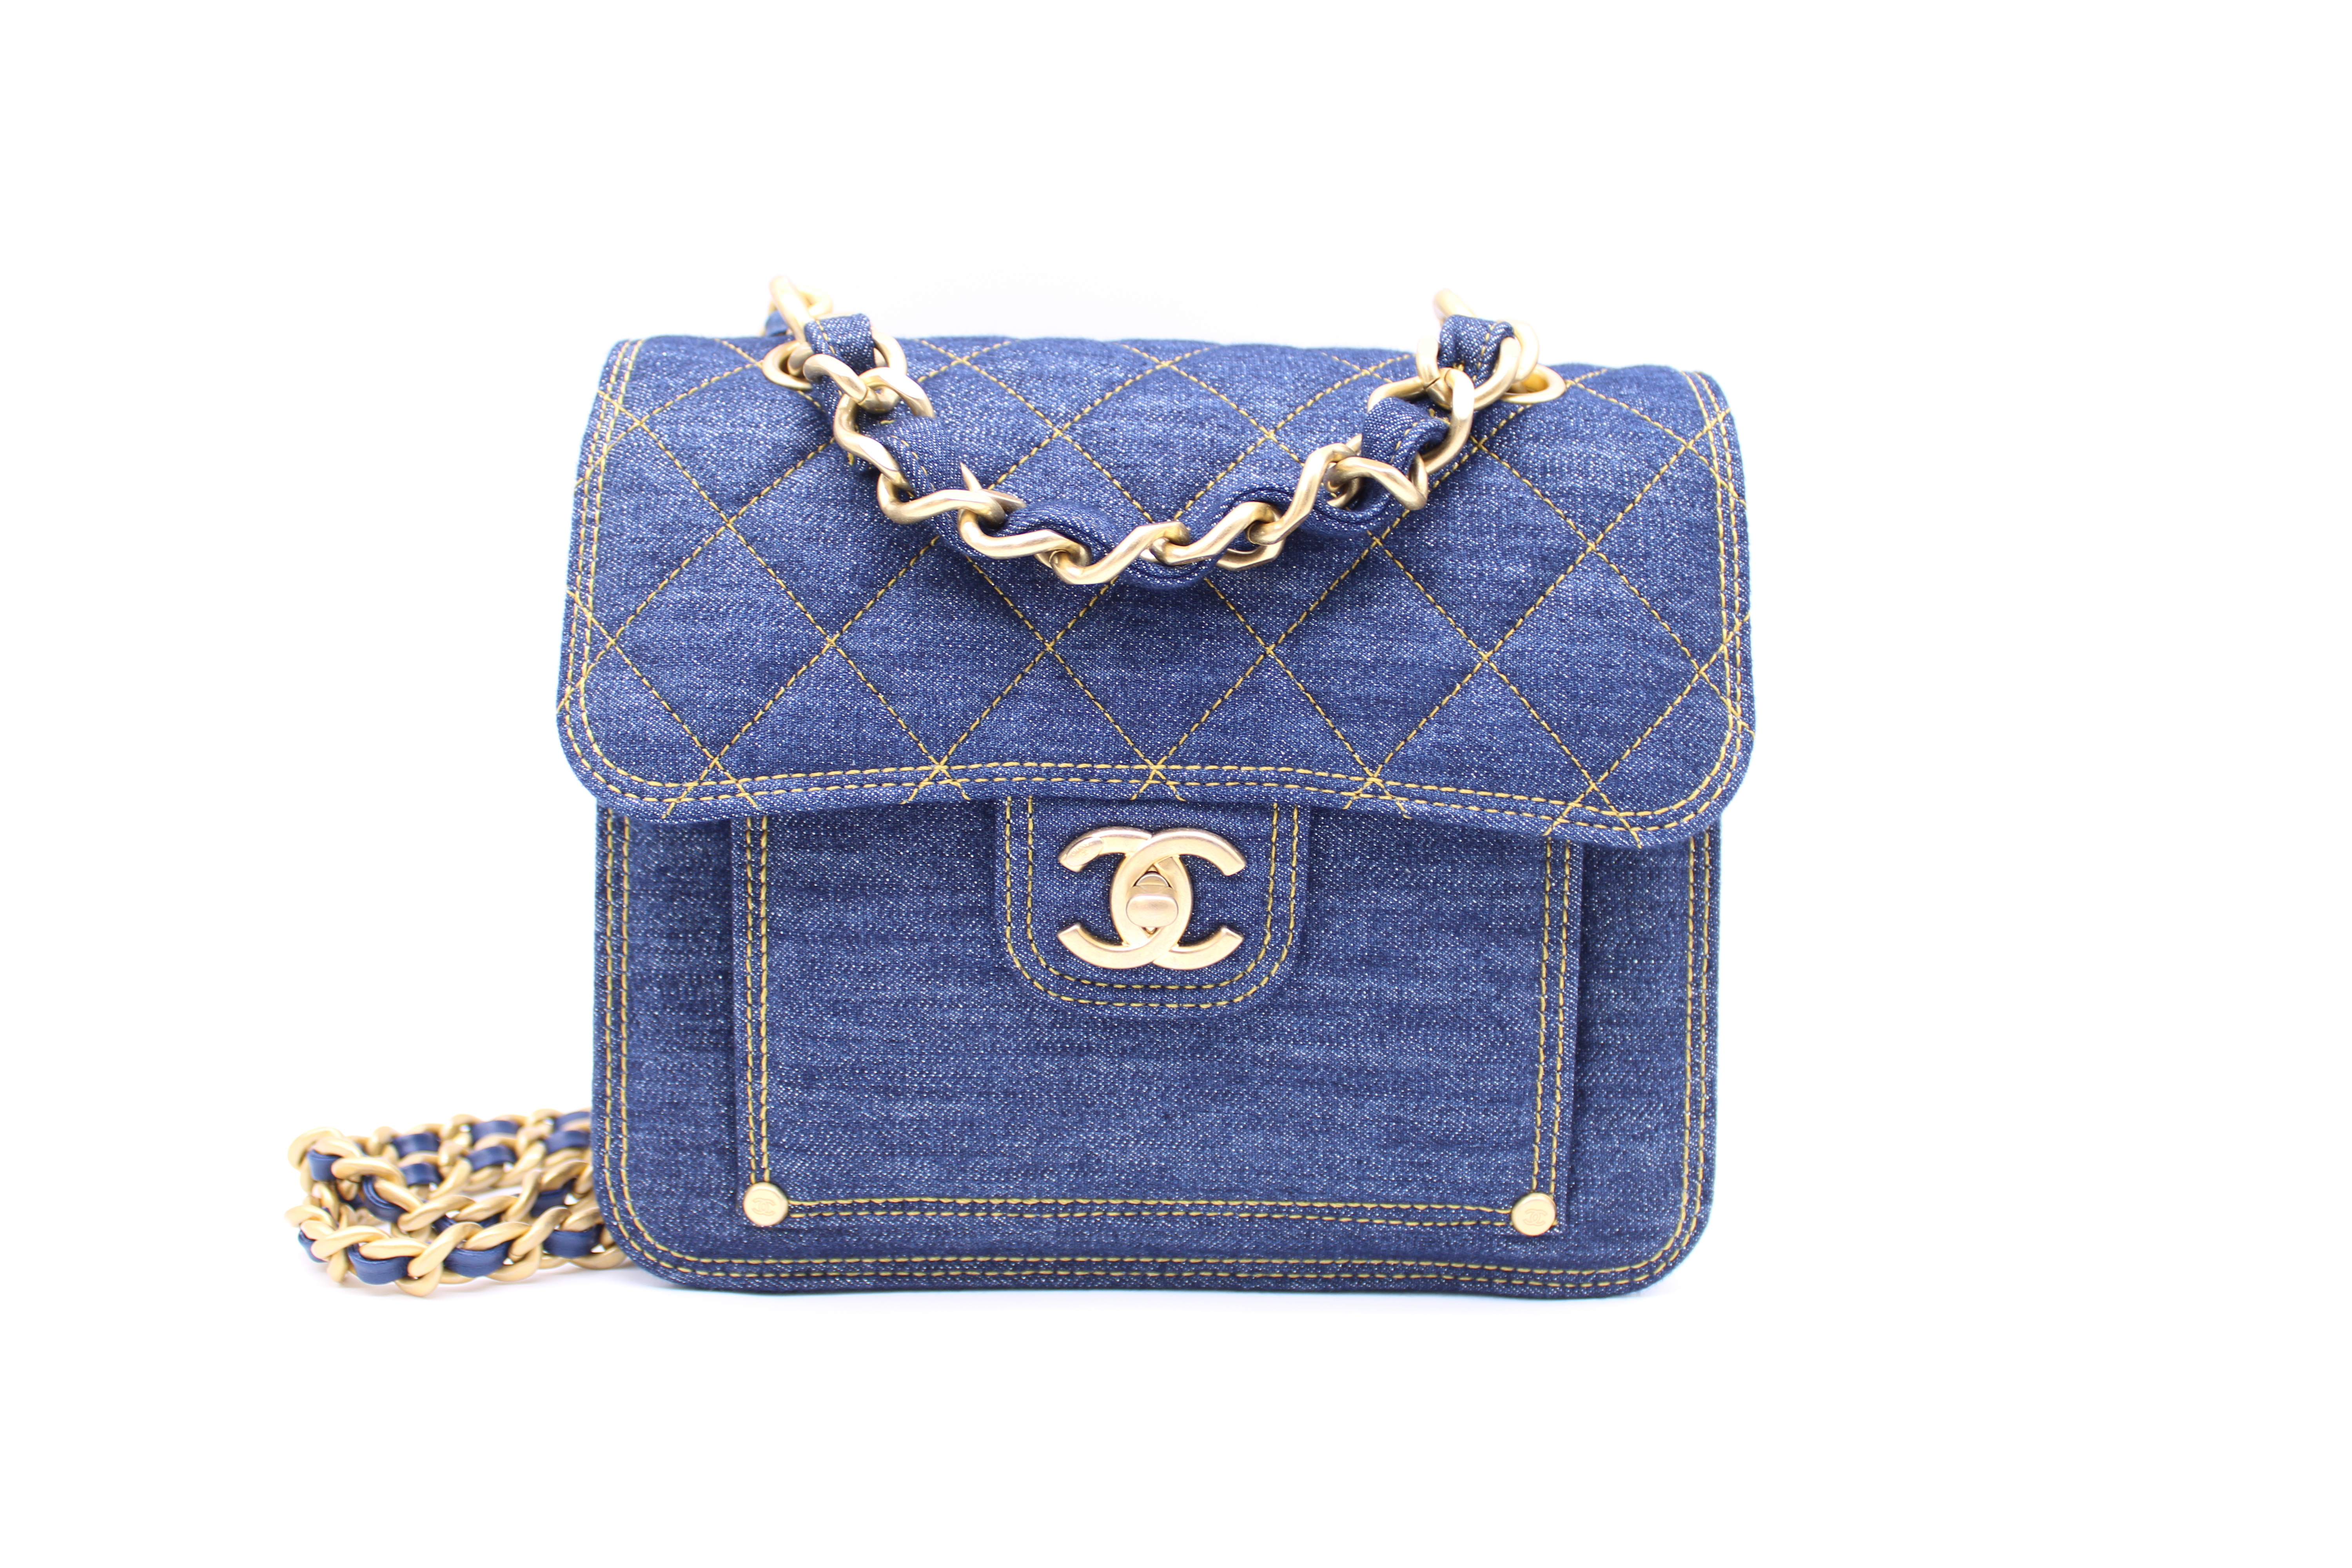 Chanel 23S Denim Flap Bag, Brushed Gold Hardware, New in Box MA001